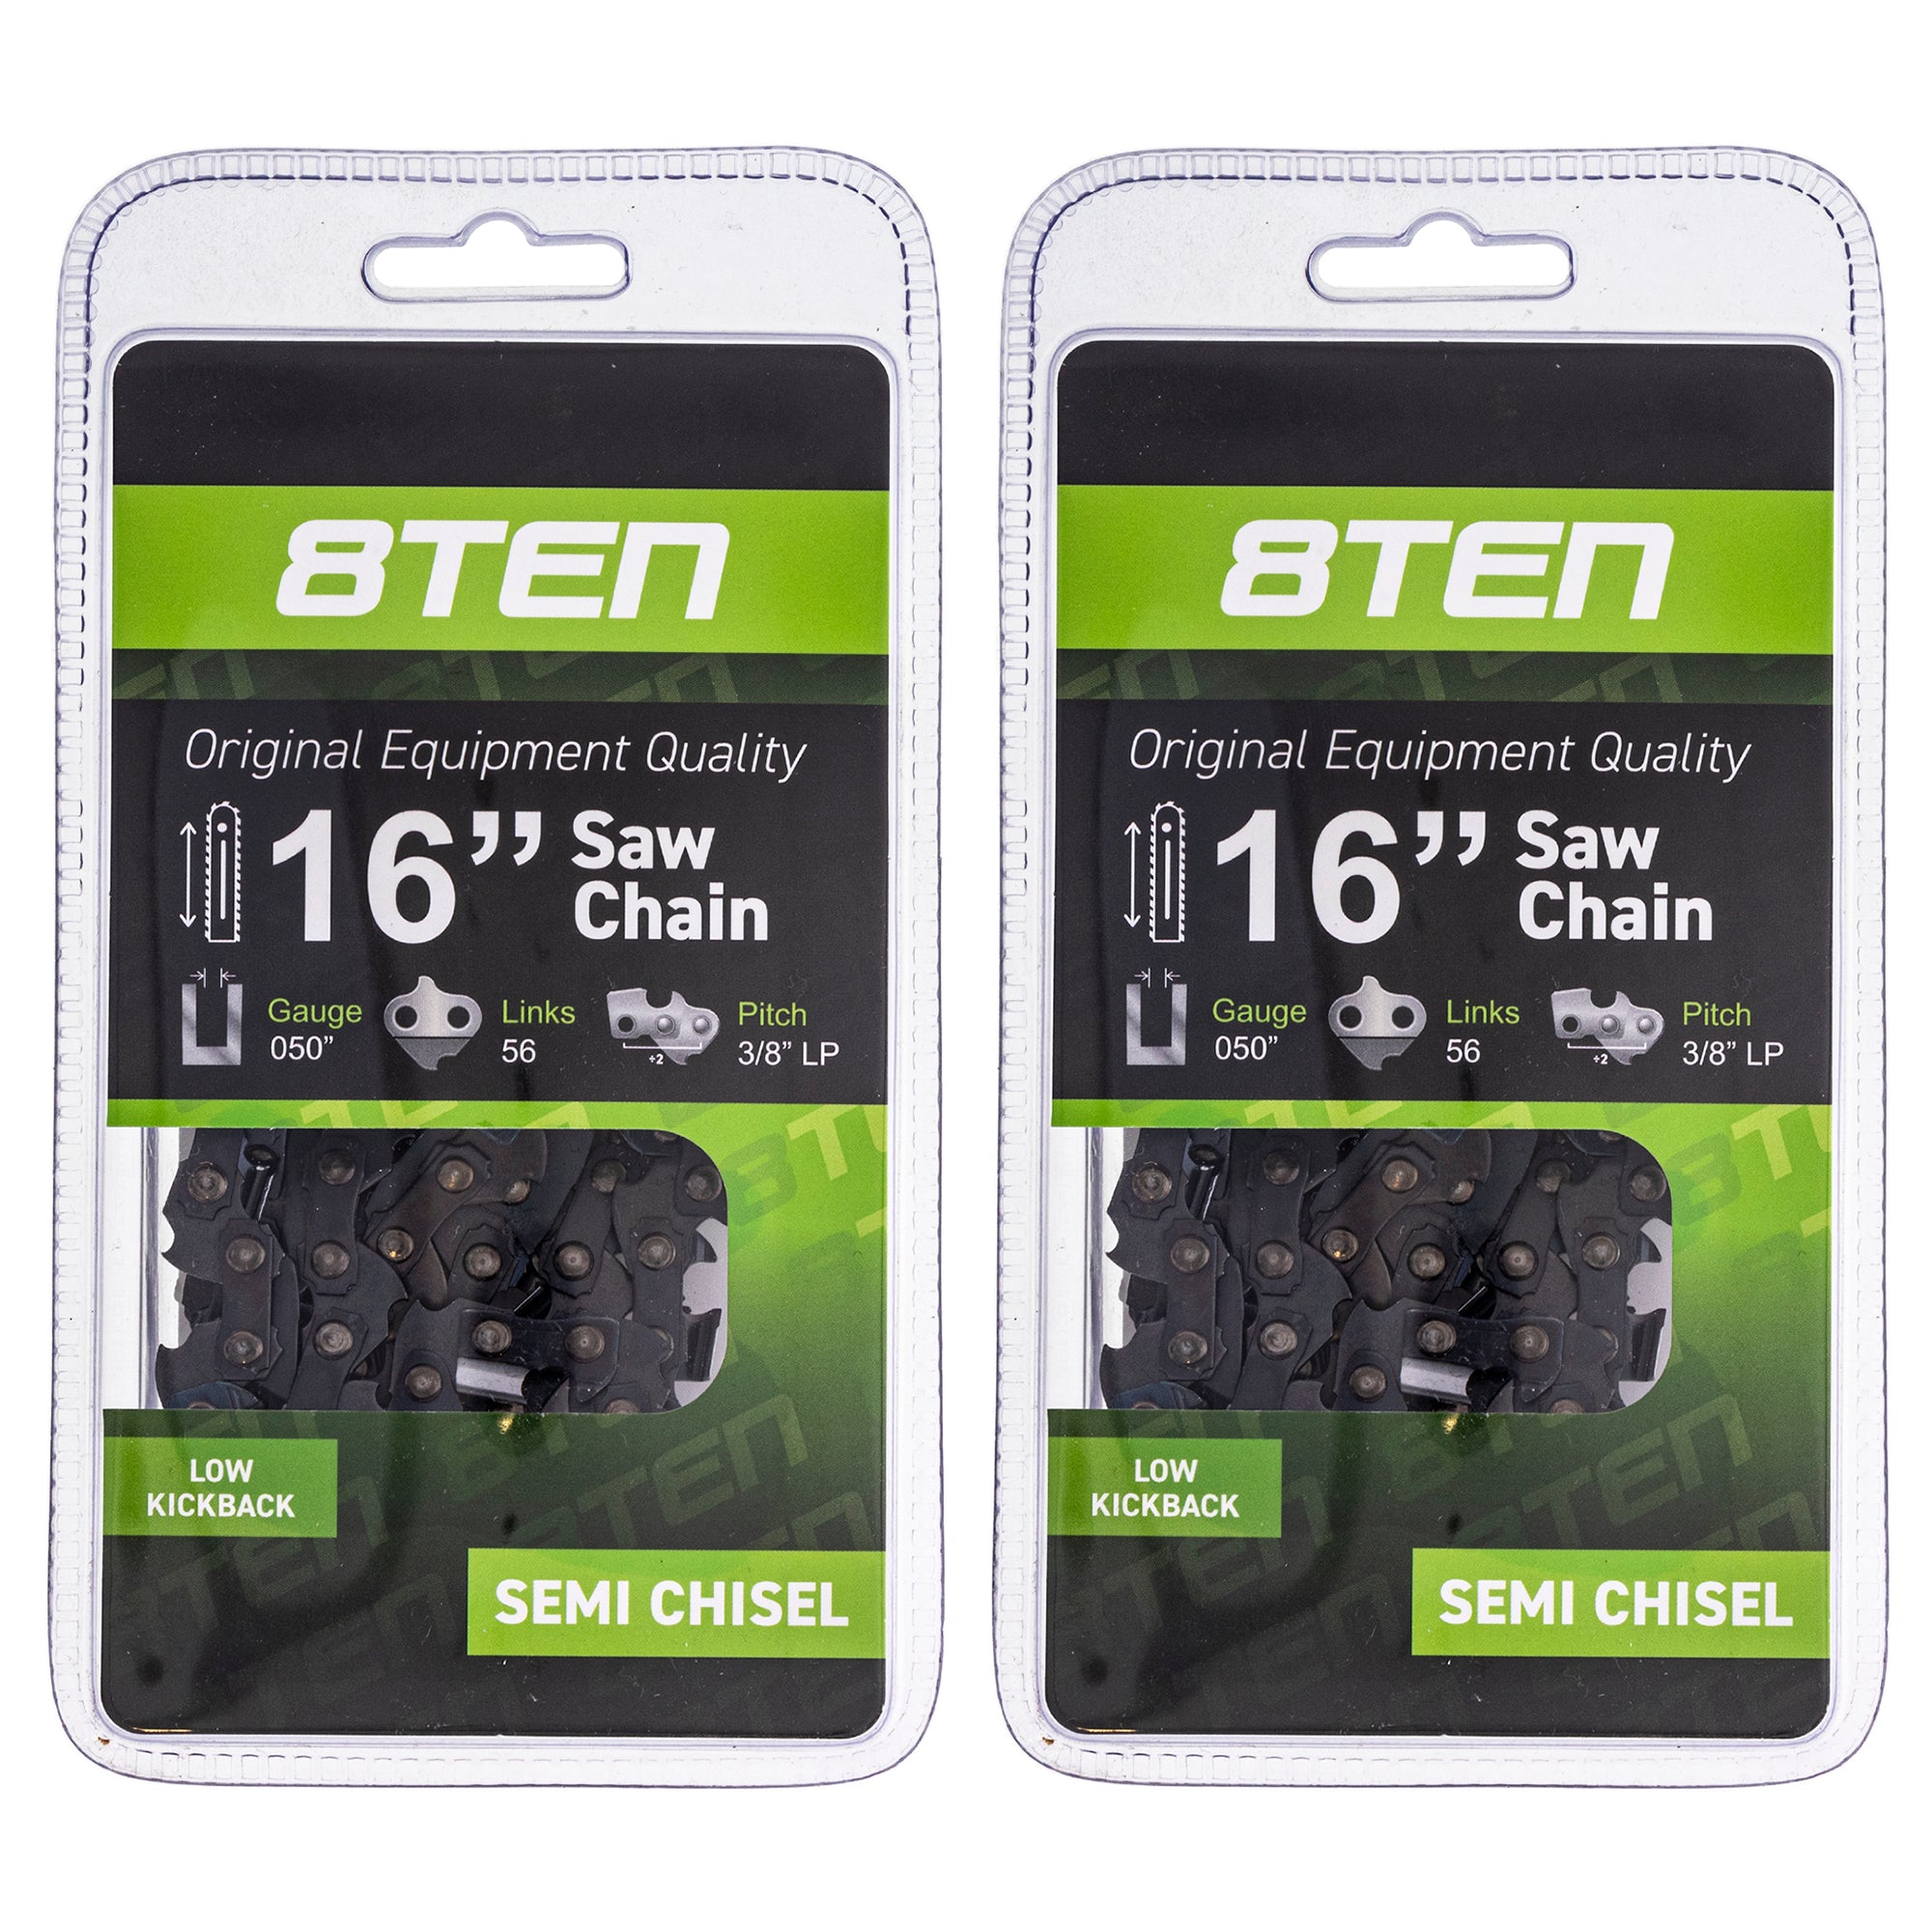 Chainsaw Chain 16 Inch .050 3/8 56DL 2-Pack for zOTHER Windsor Stens Oregon Ref. Oregon 8TEN 810-CCC2242H